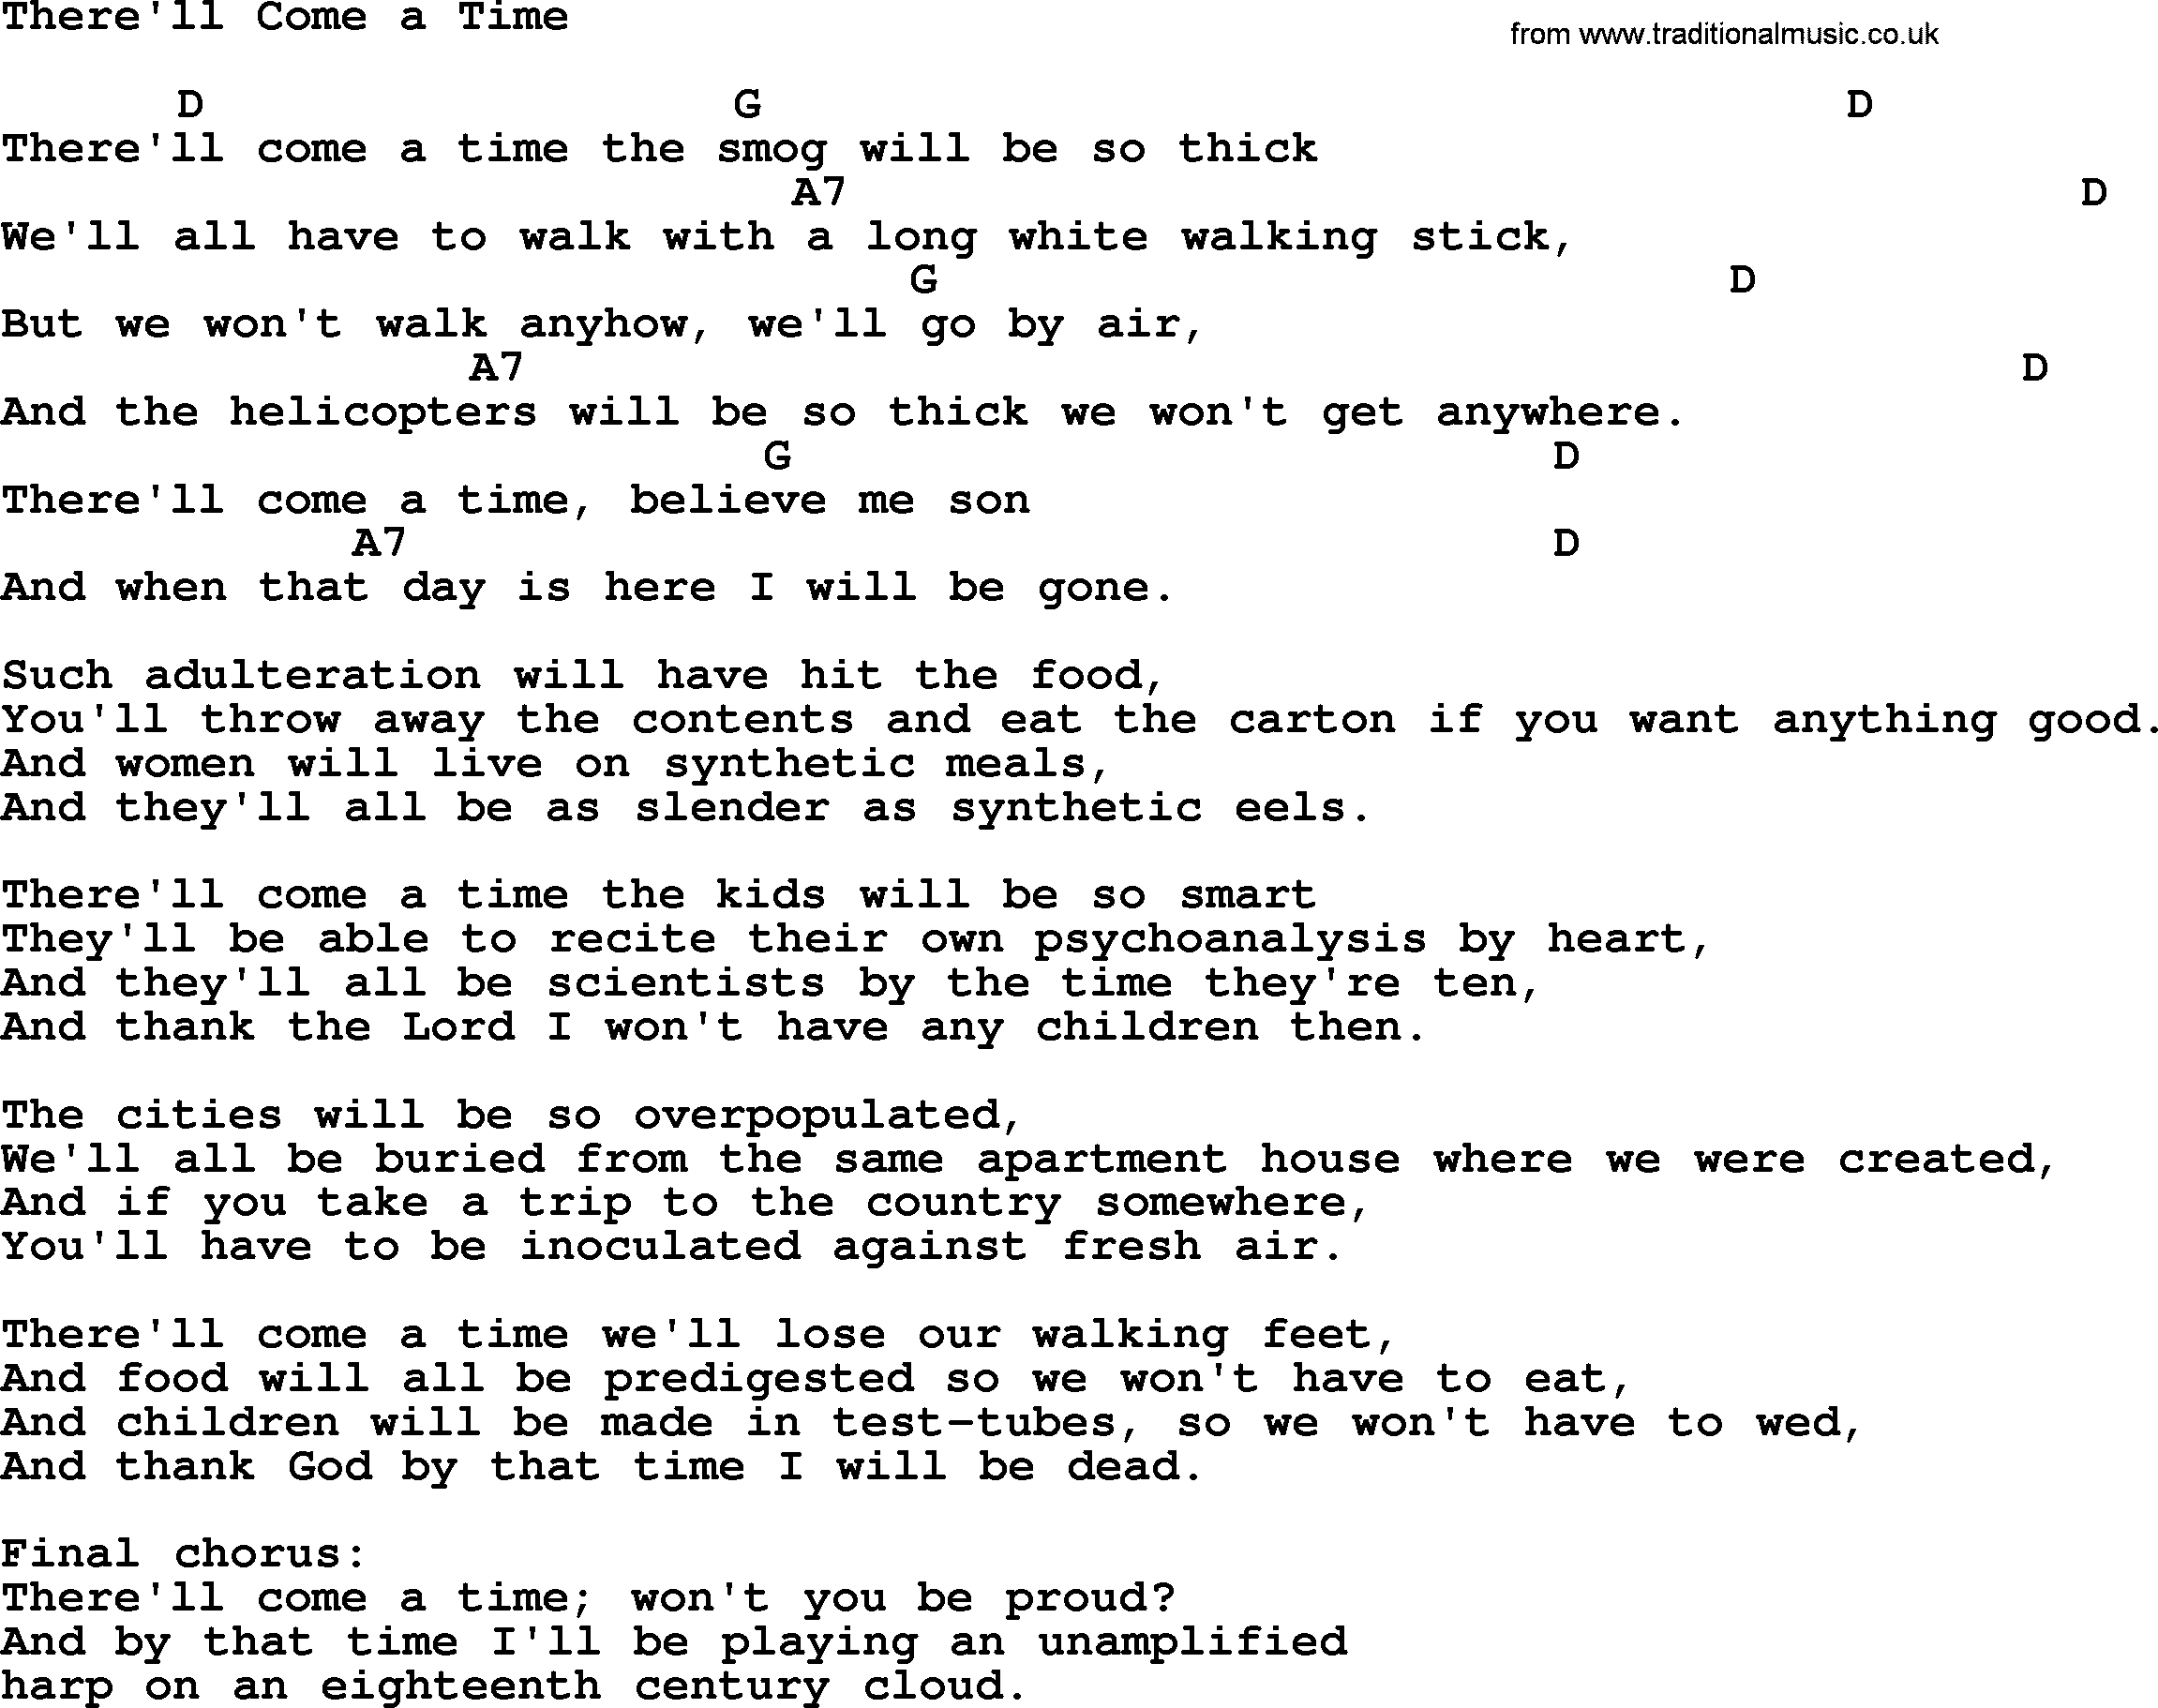 Pete Seeger song There'll Come a Time, lyrics and chords